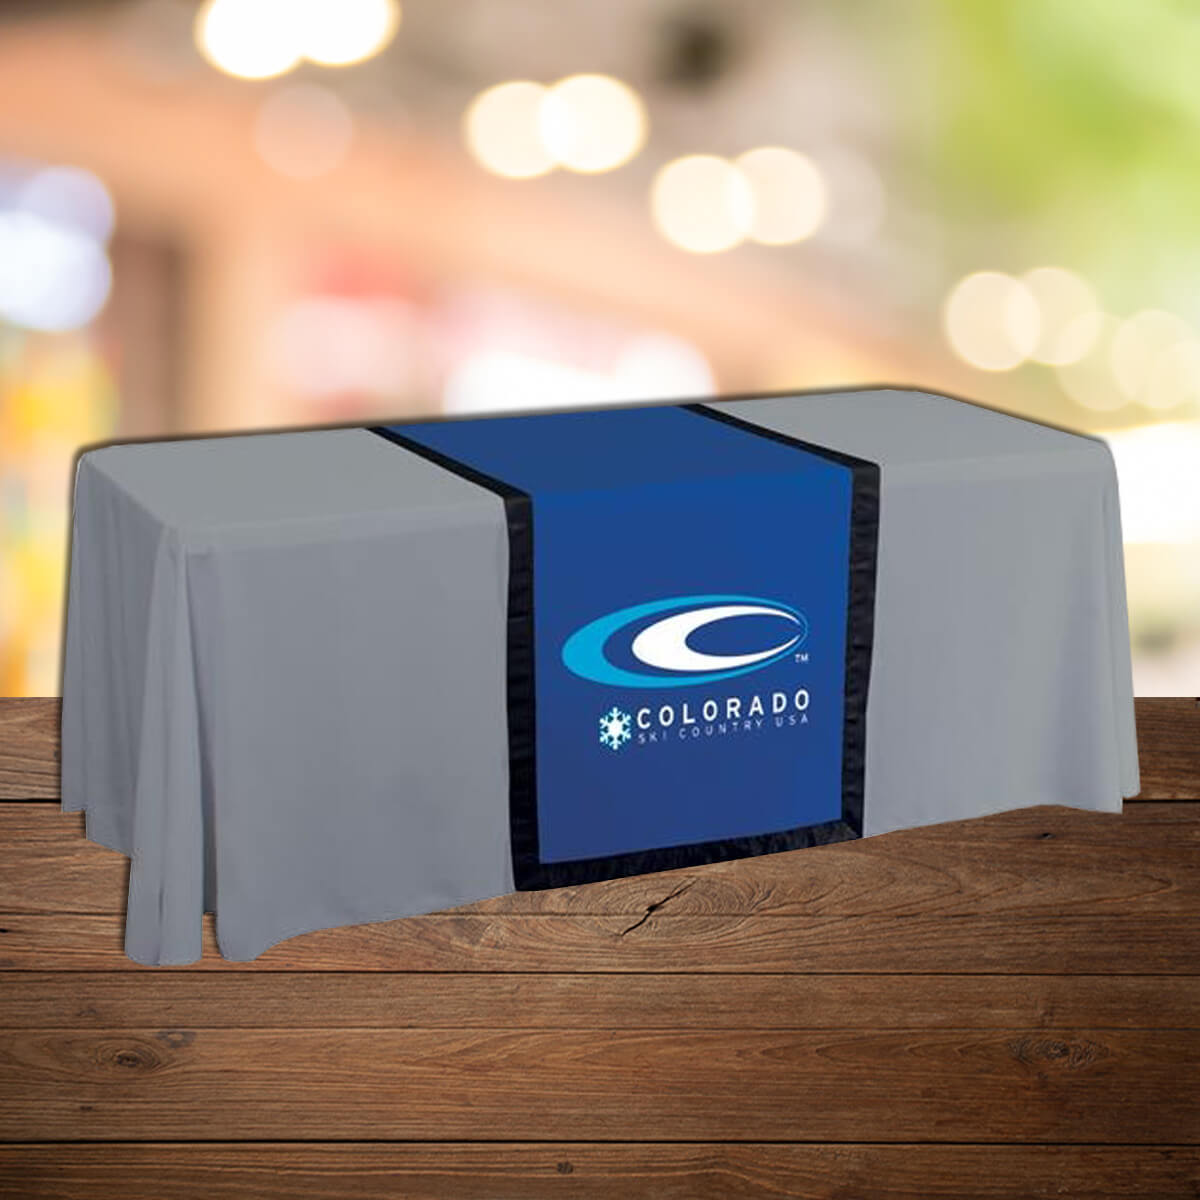 Logo'd table runner display exhibit trade show by Curative Printing